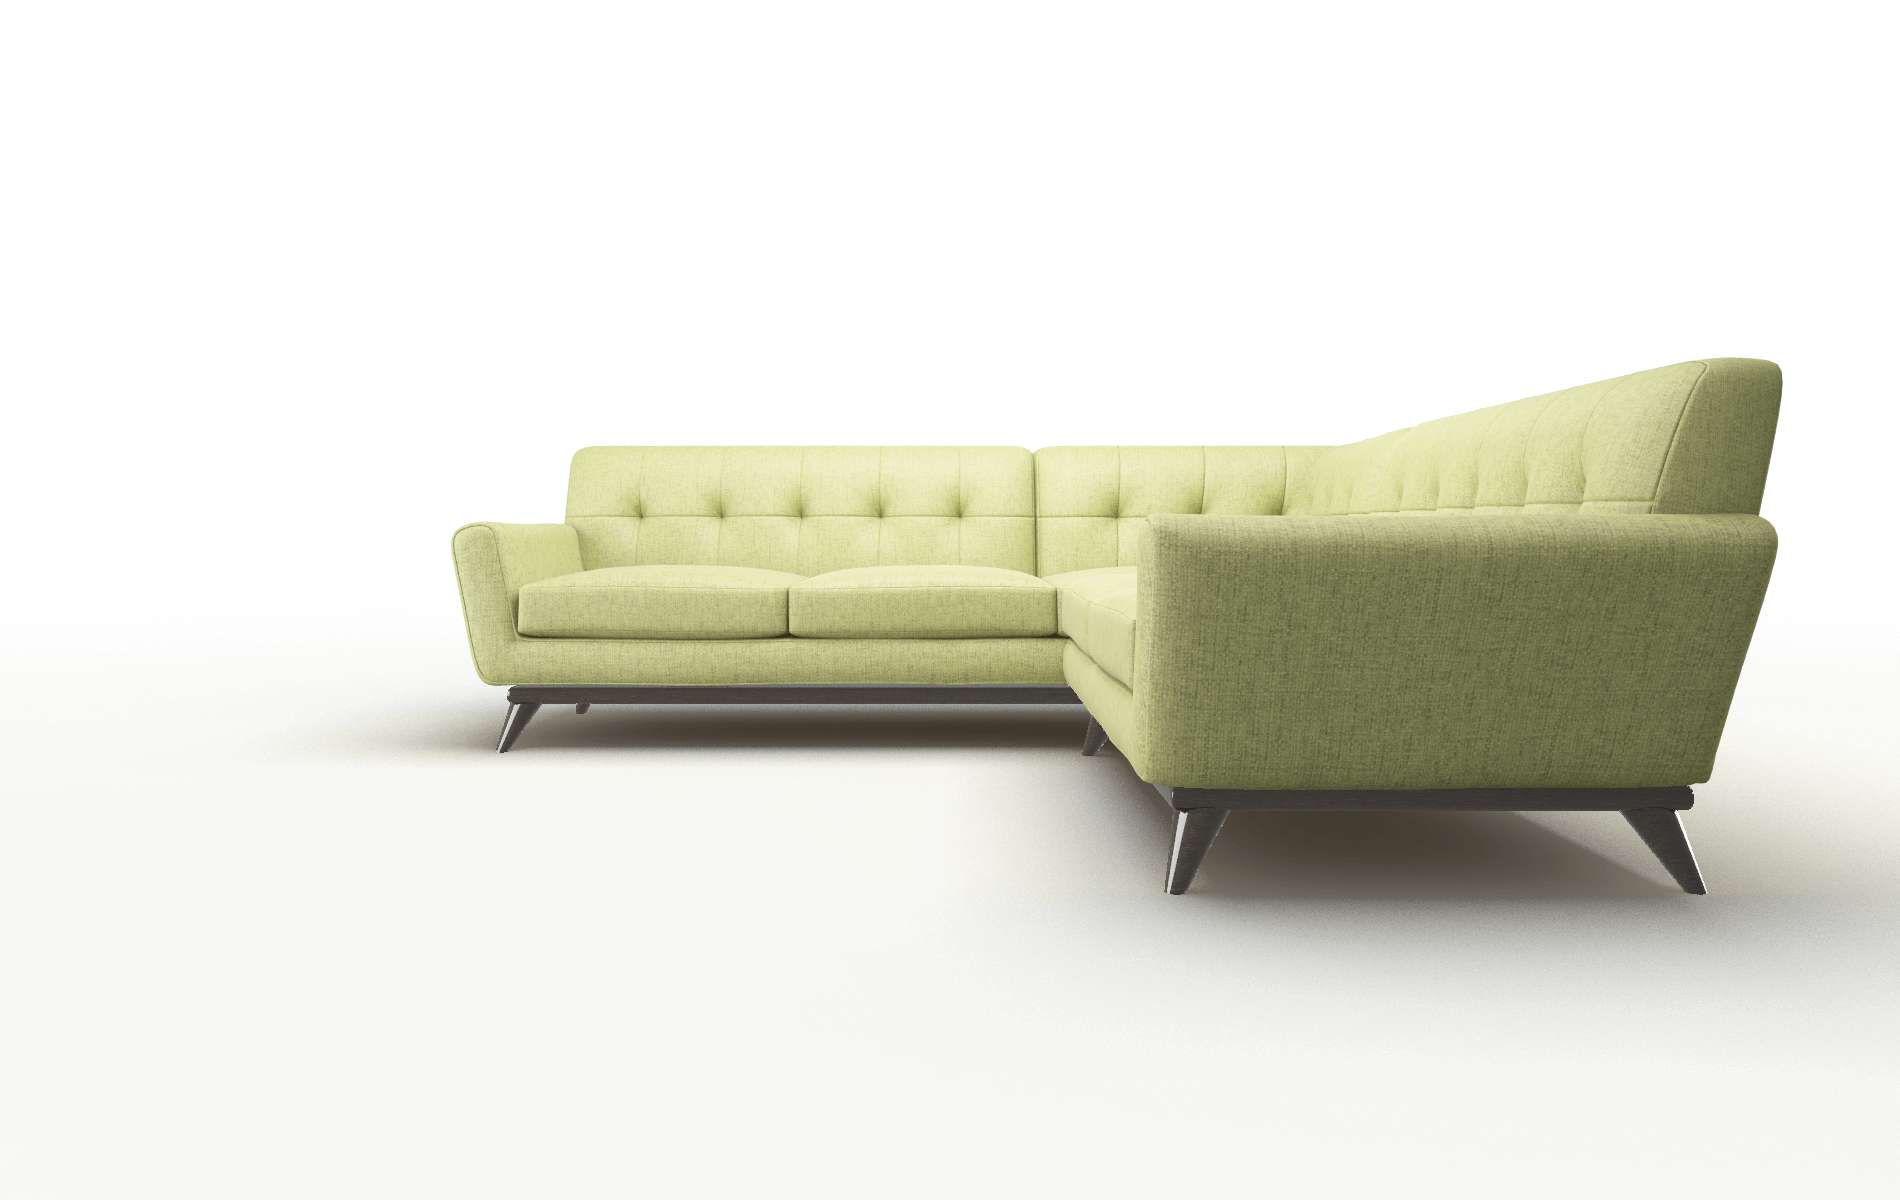 Brussels Notion Appletini Sectional espresso legs